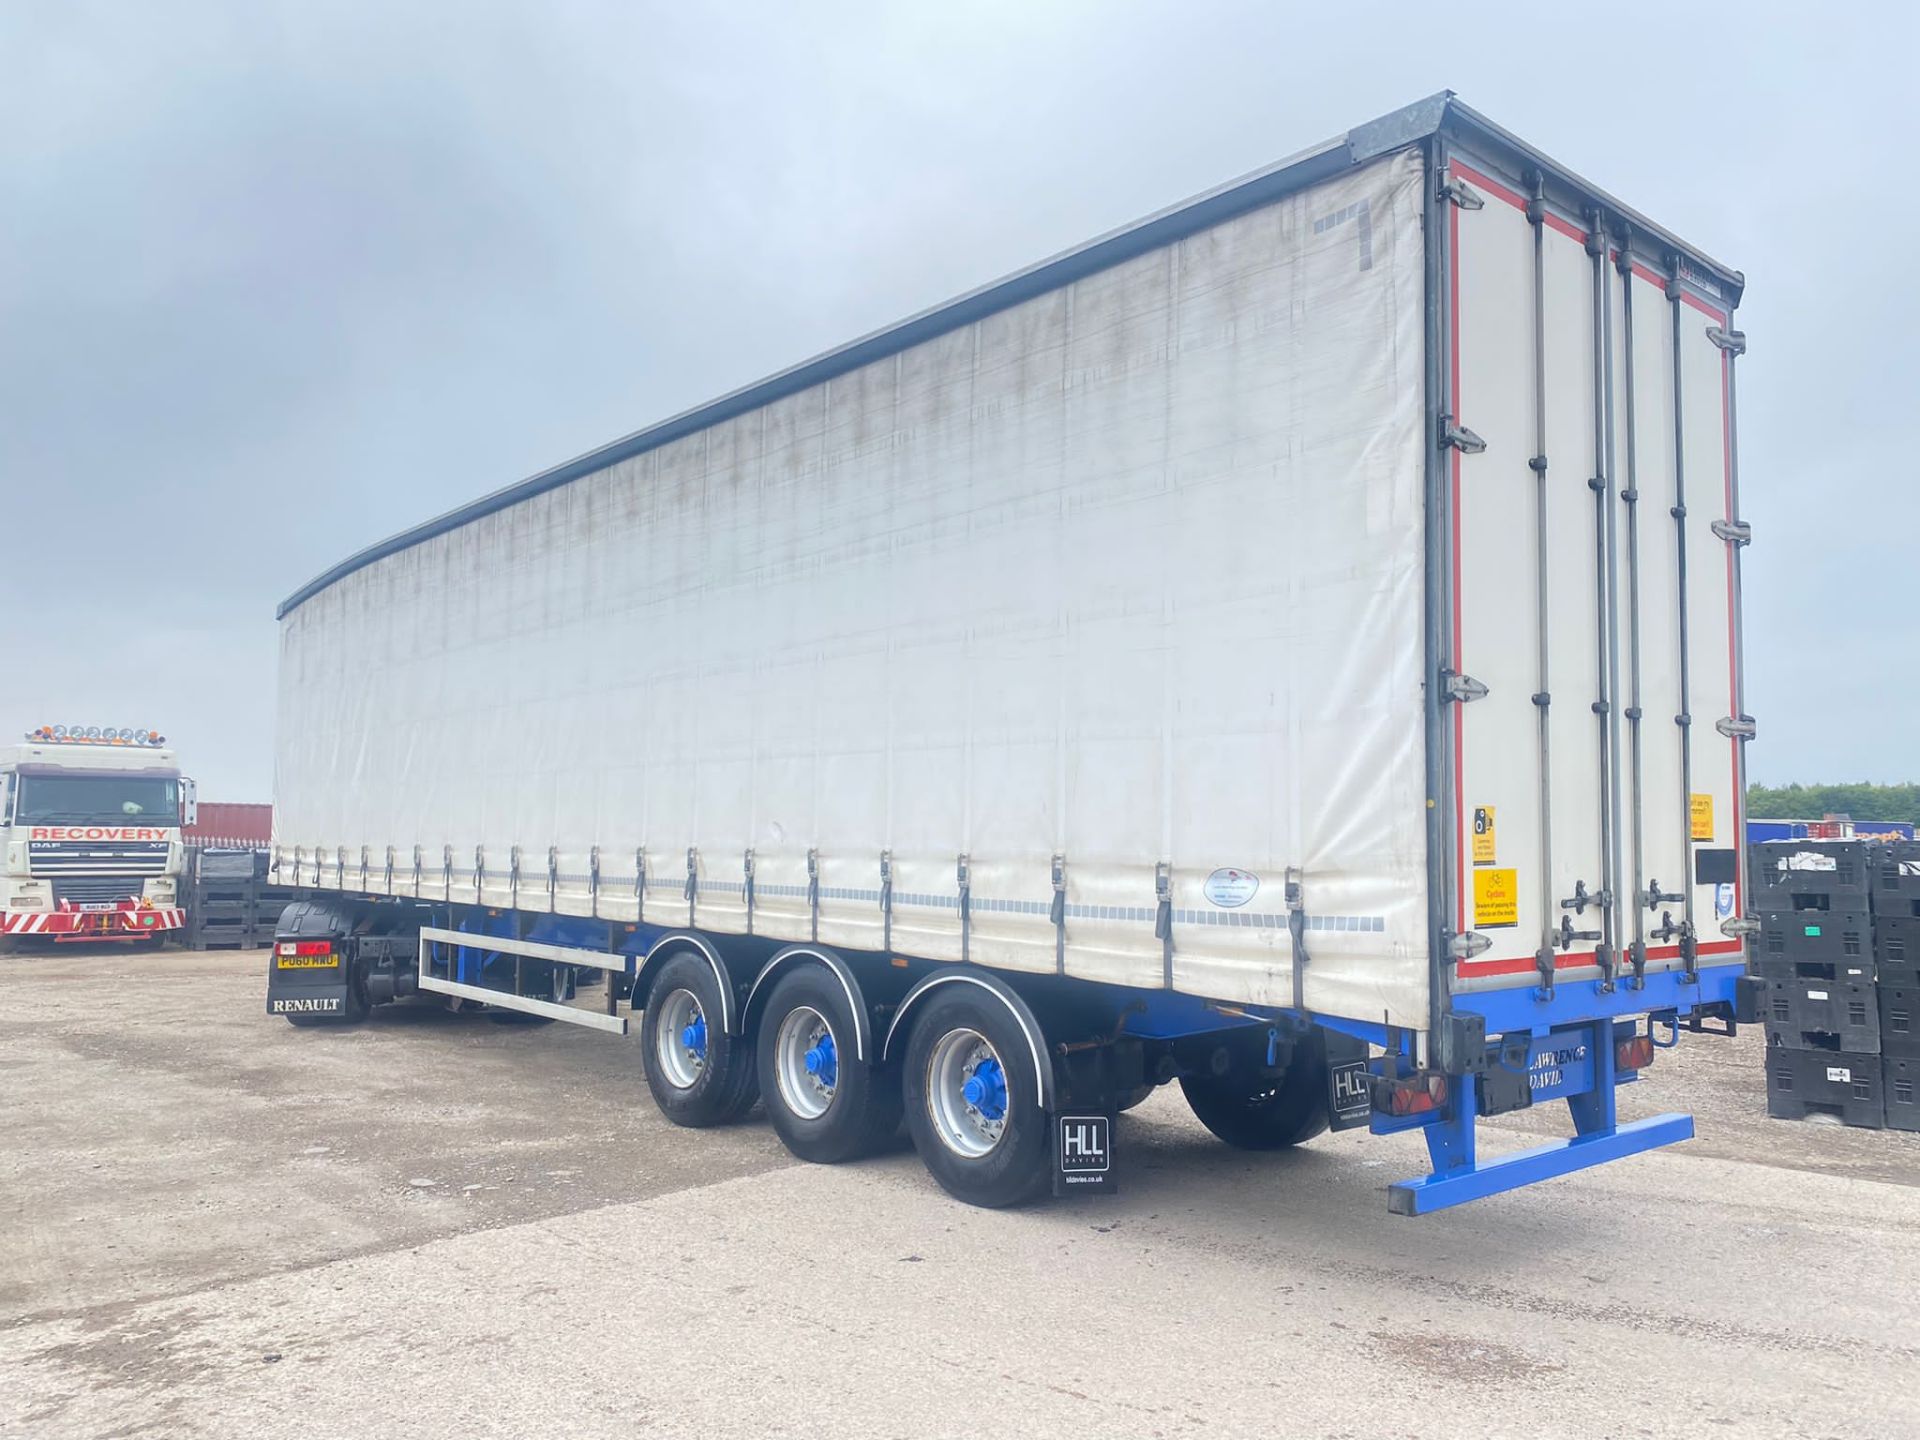 2016 MODEL LAWRENCE DAVID XL CURTAIN SIDE TRAILER - 4.4 METRES HIGH - Image 3 of 6